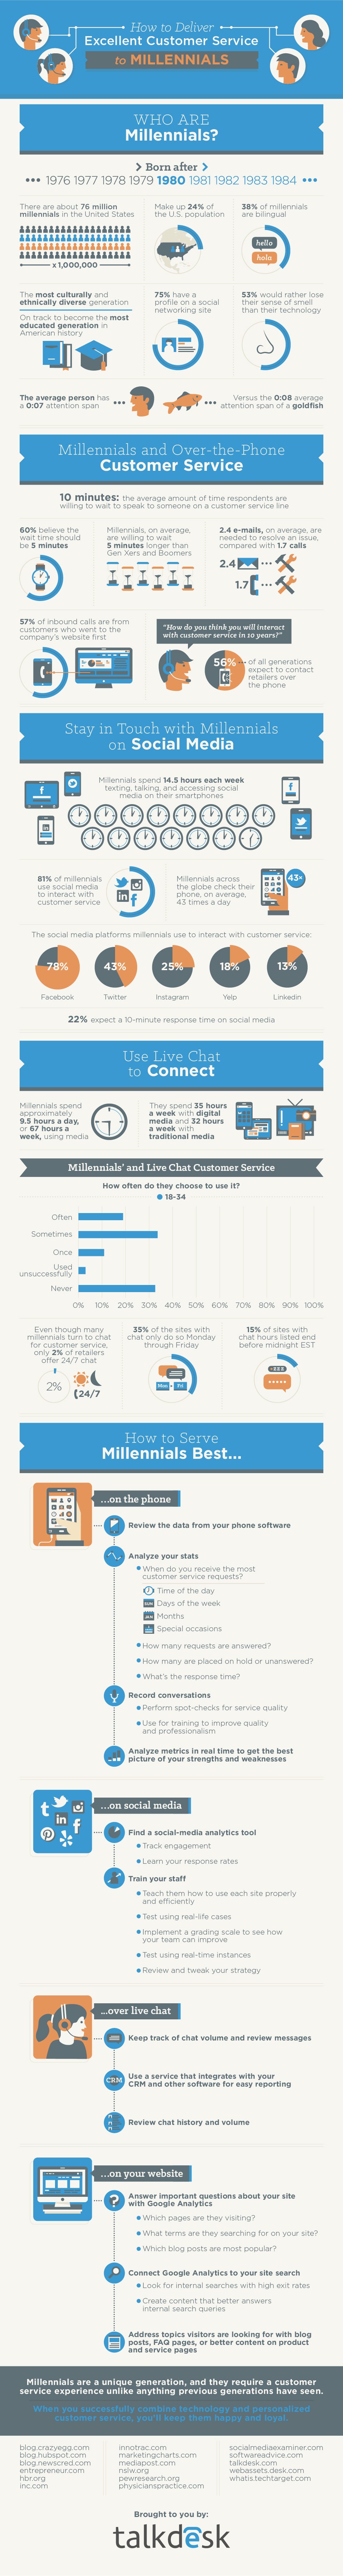 what-millennials-expect-from-customer-service